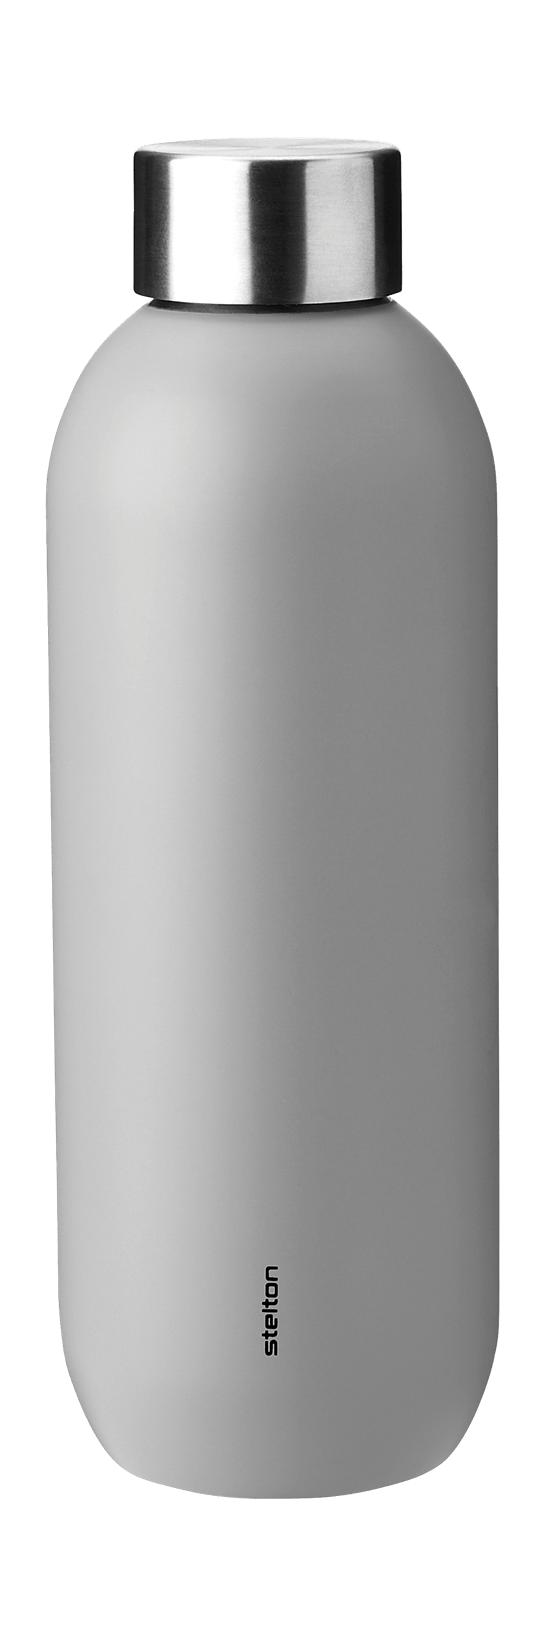 Stelton Keep Cool Termo Bottle 0,6 L, lysegrå